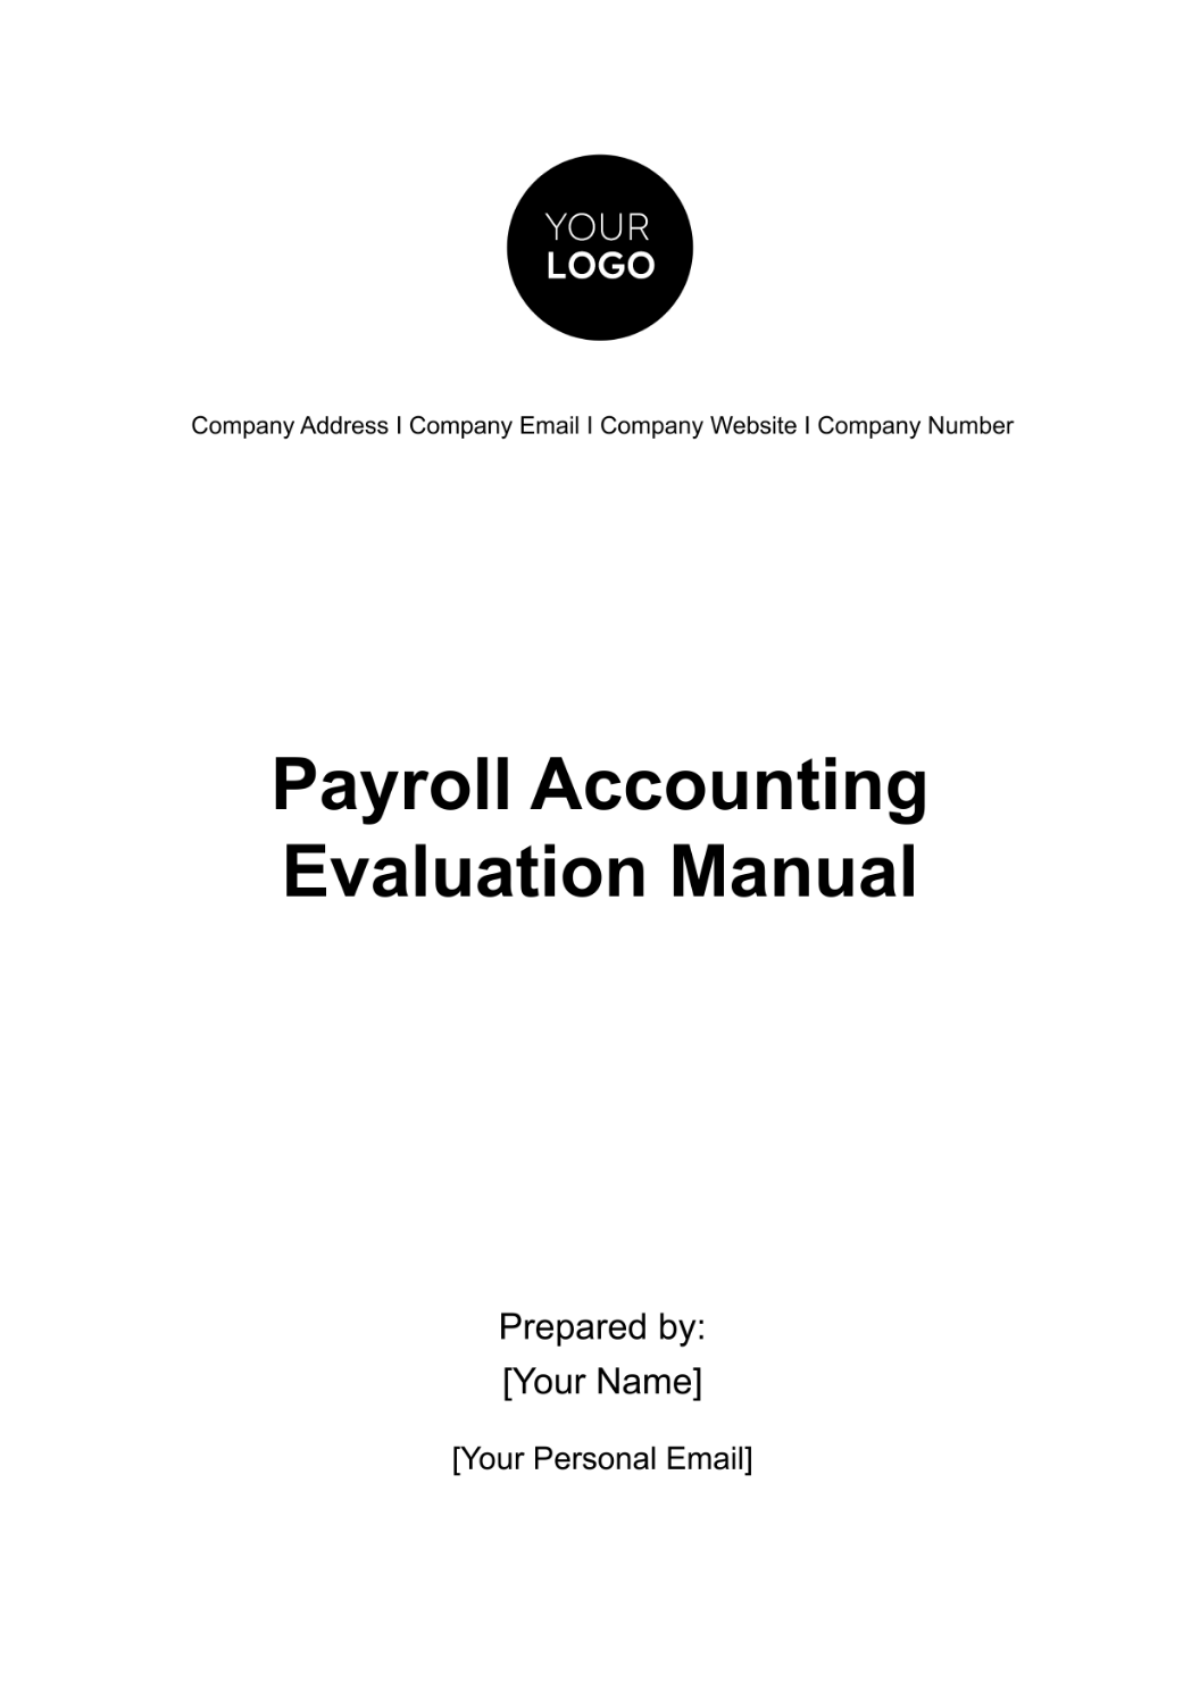 Payroll Accounting Evaluation Manual Template